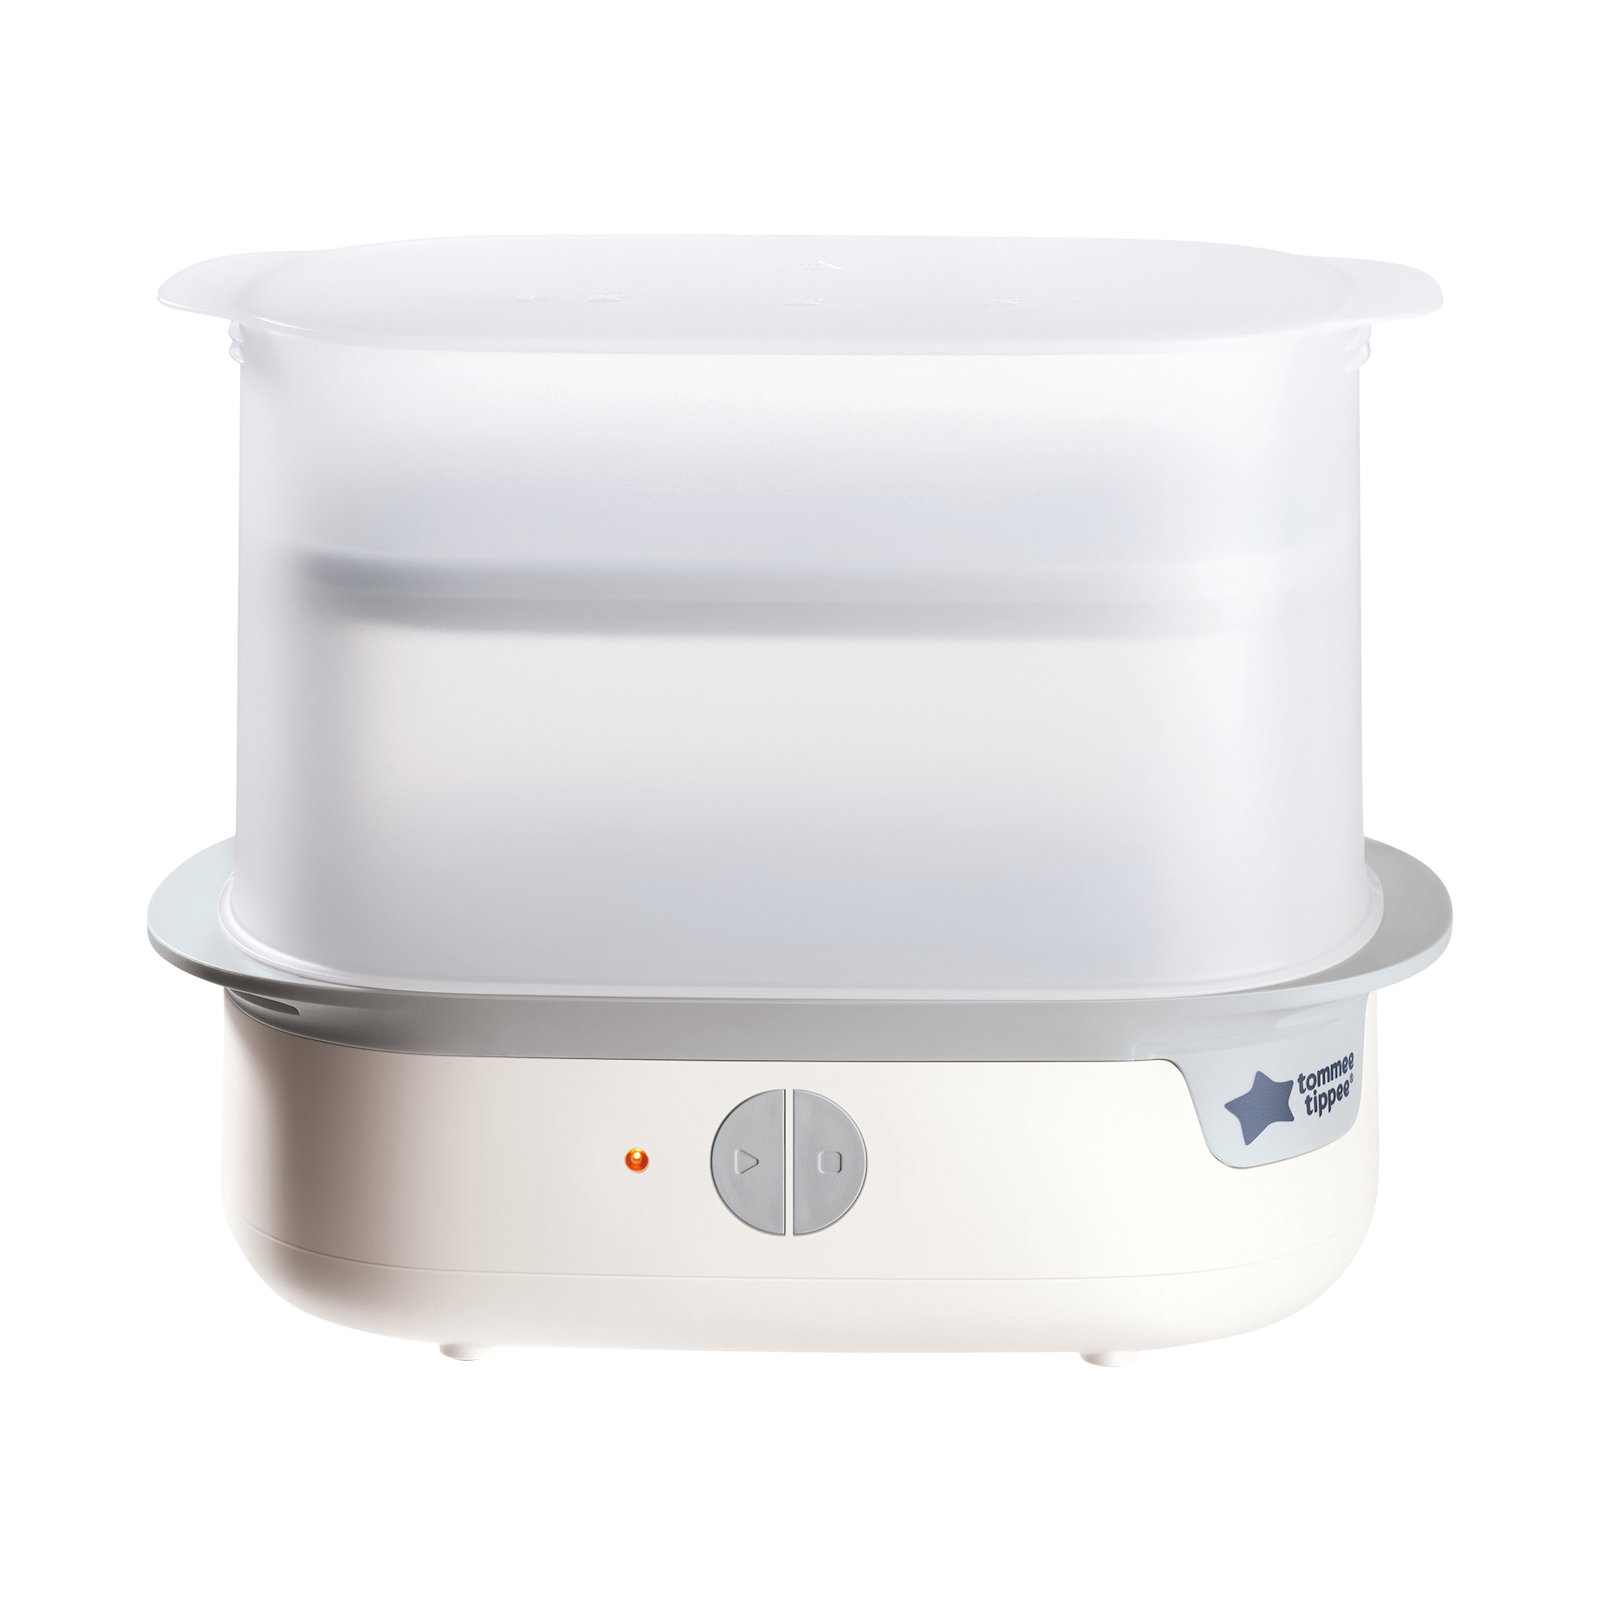 Tommee Tippee Perfect Prep Machine - White, Warmers